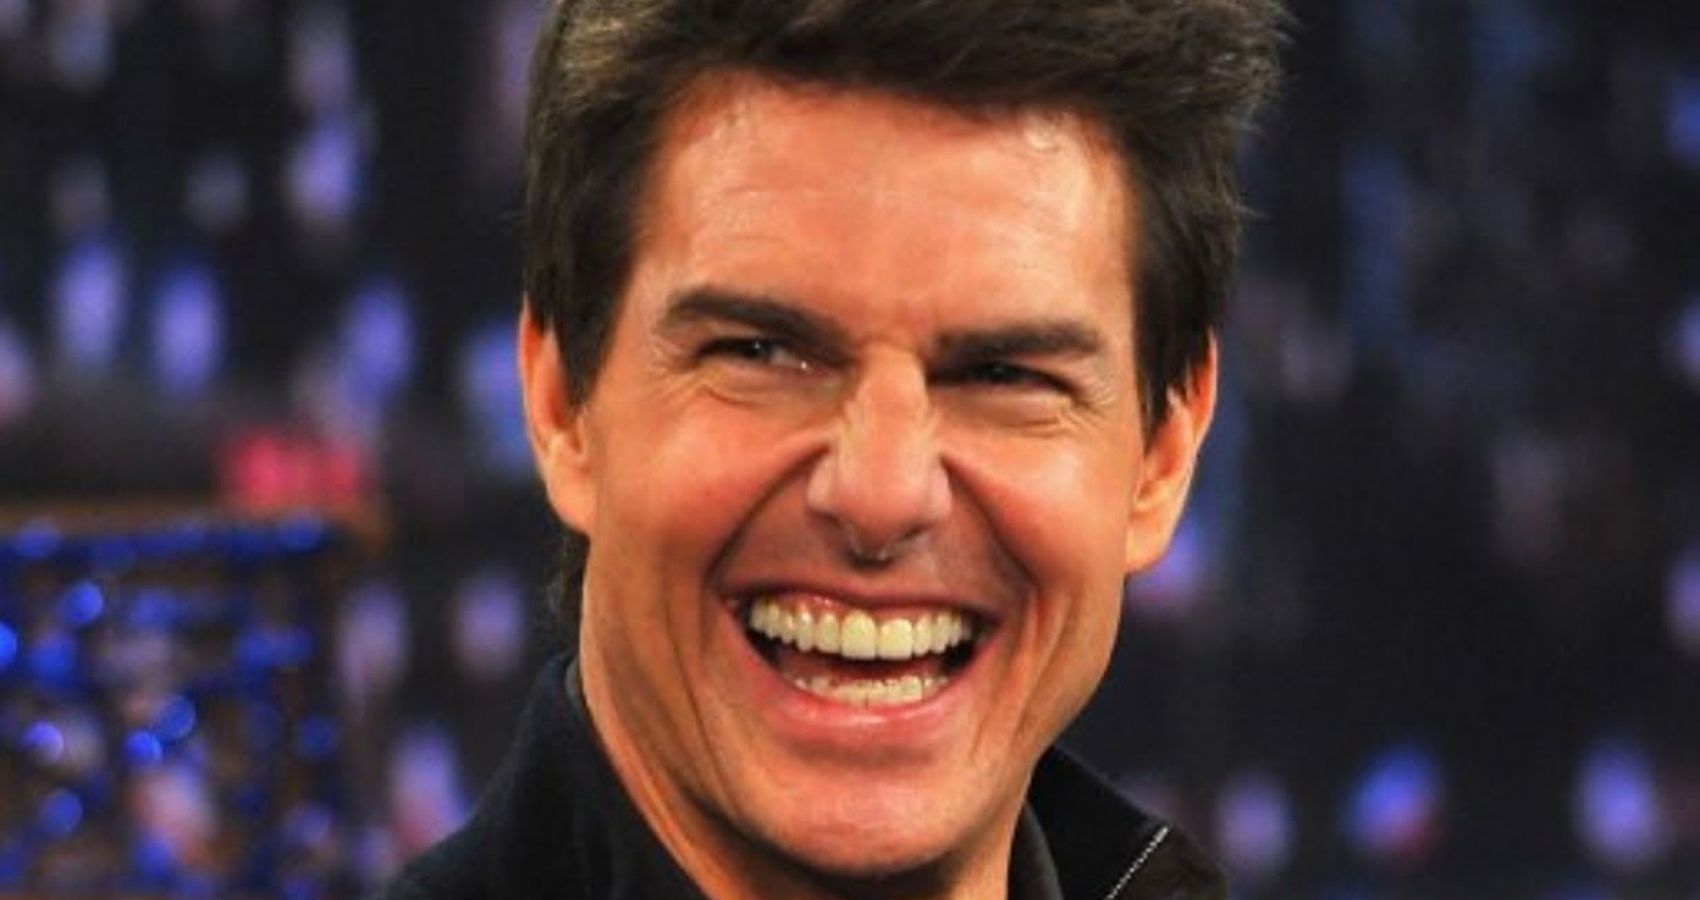 Here's What We Know About Tom Cruise And His Strange Teeth